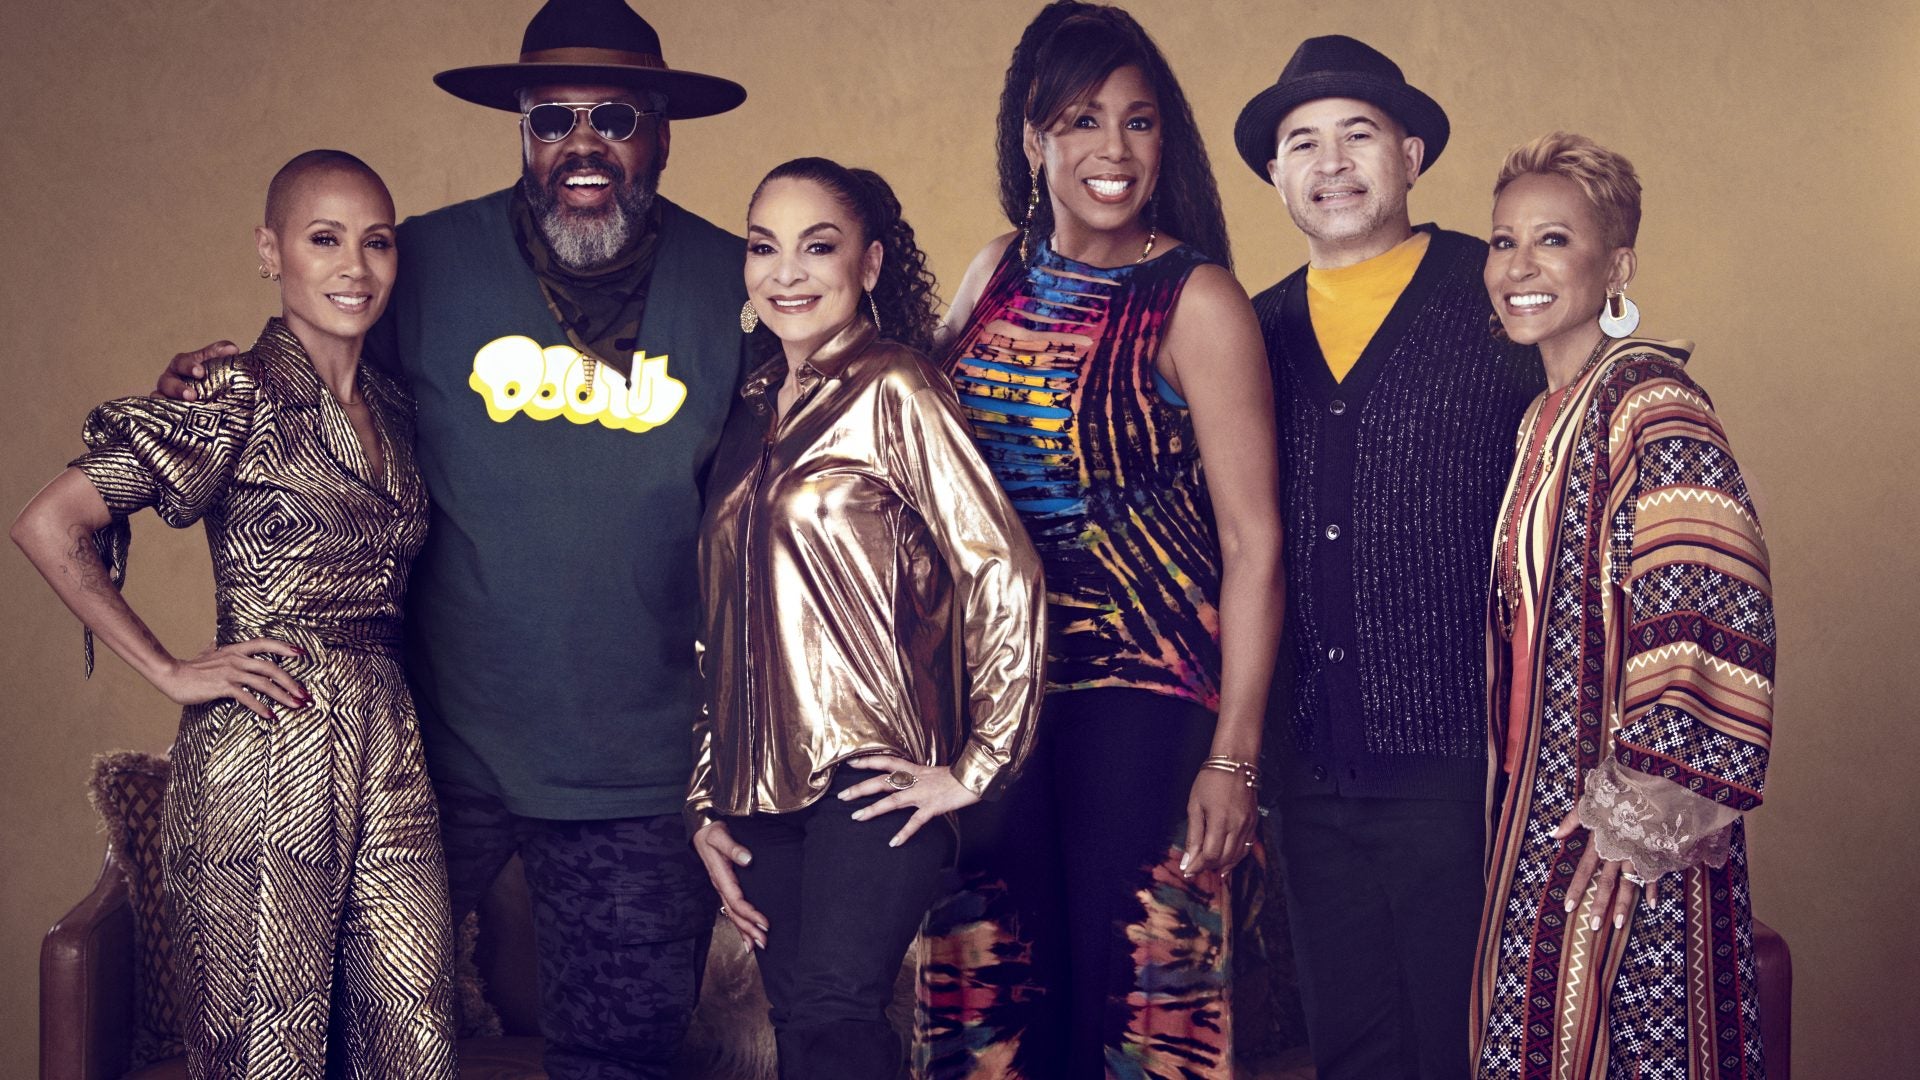 EXCLUSIVE Clip: Jasmine Guy Reveals Behind The Scenes 'A Different World' Romance During 'Red Table Talk' Roundtable